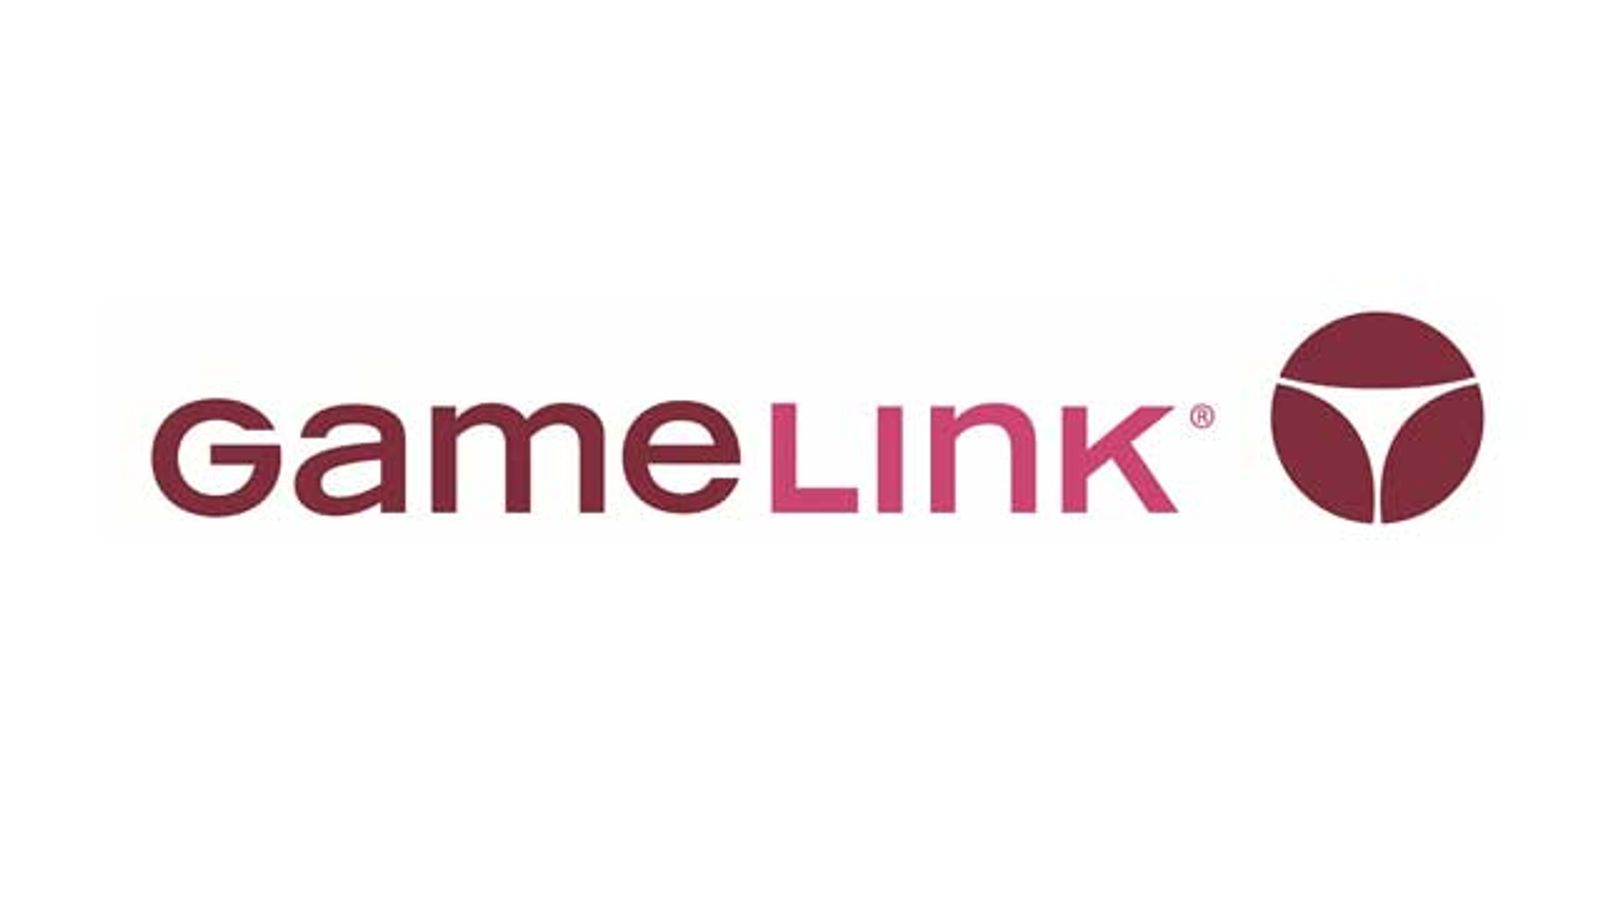 GameLink Offers Savings on ‘Best of the Year’ Lists